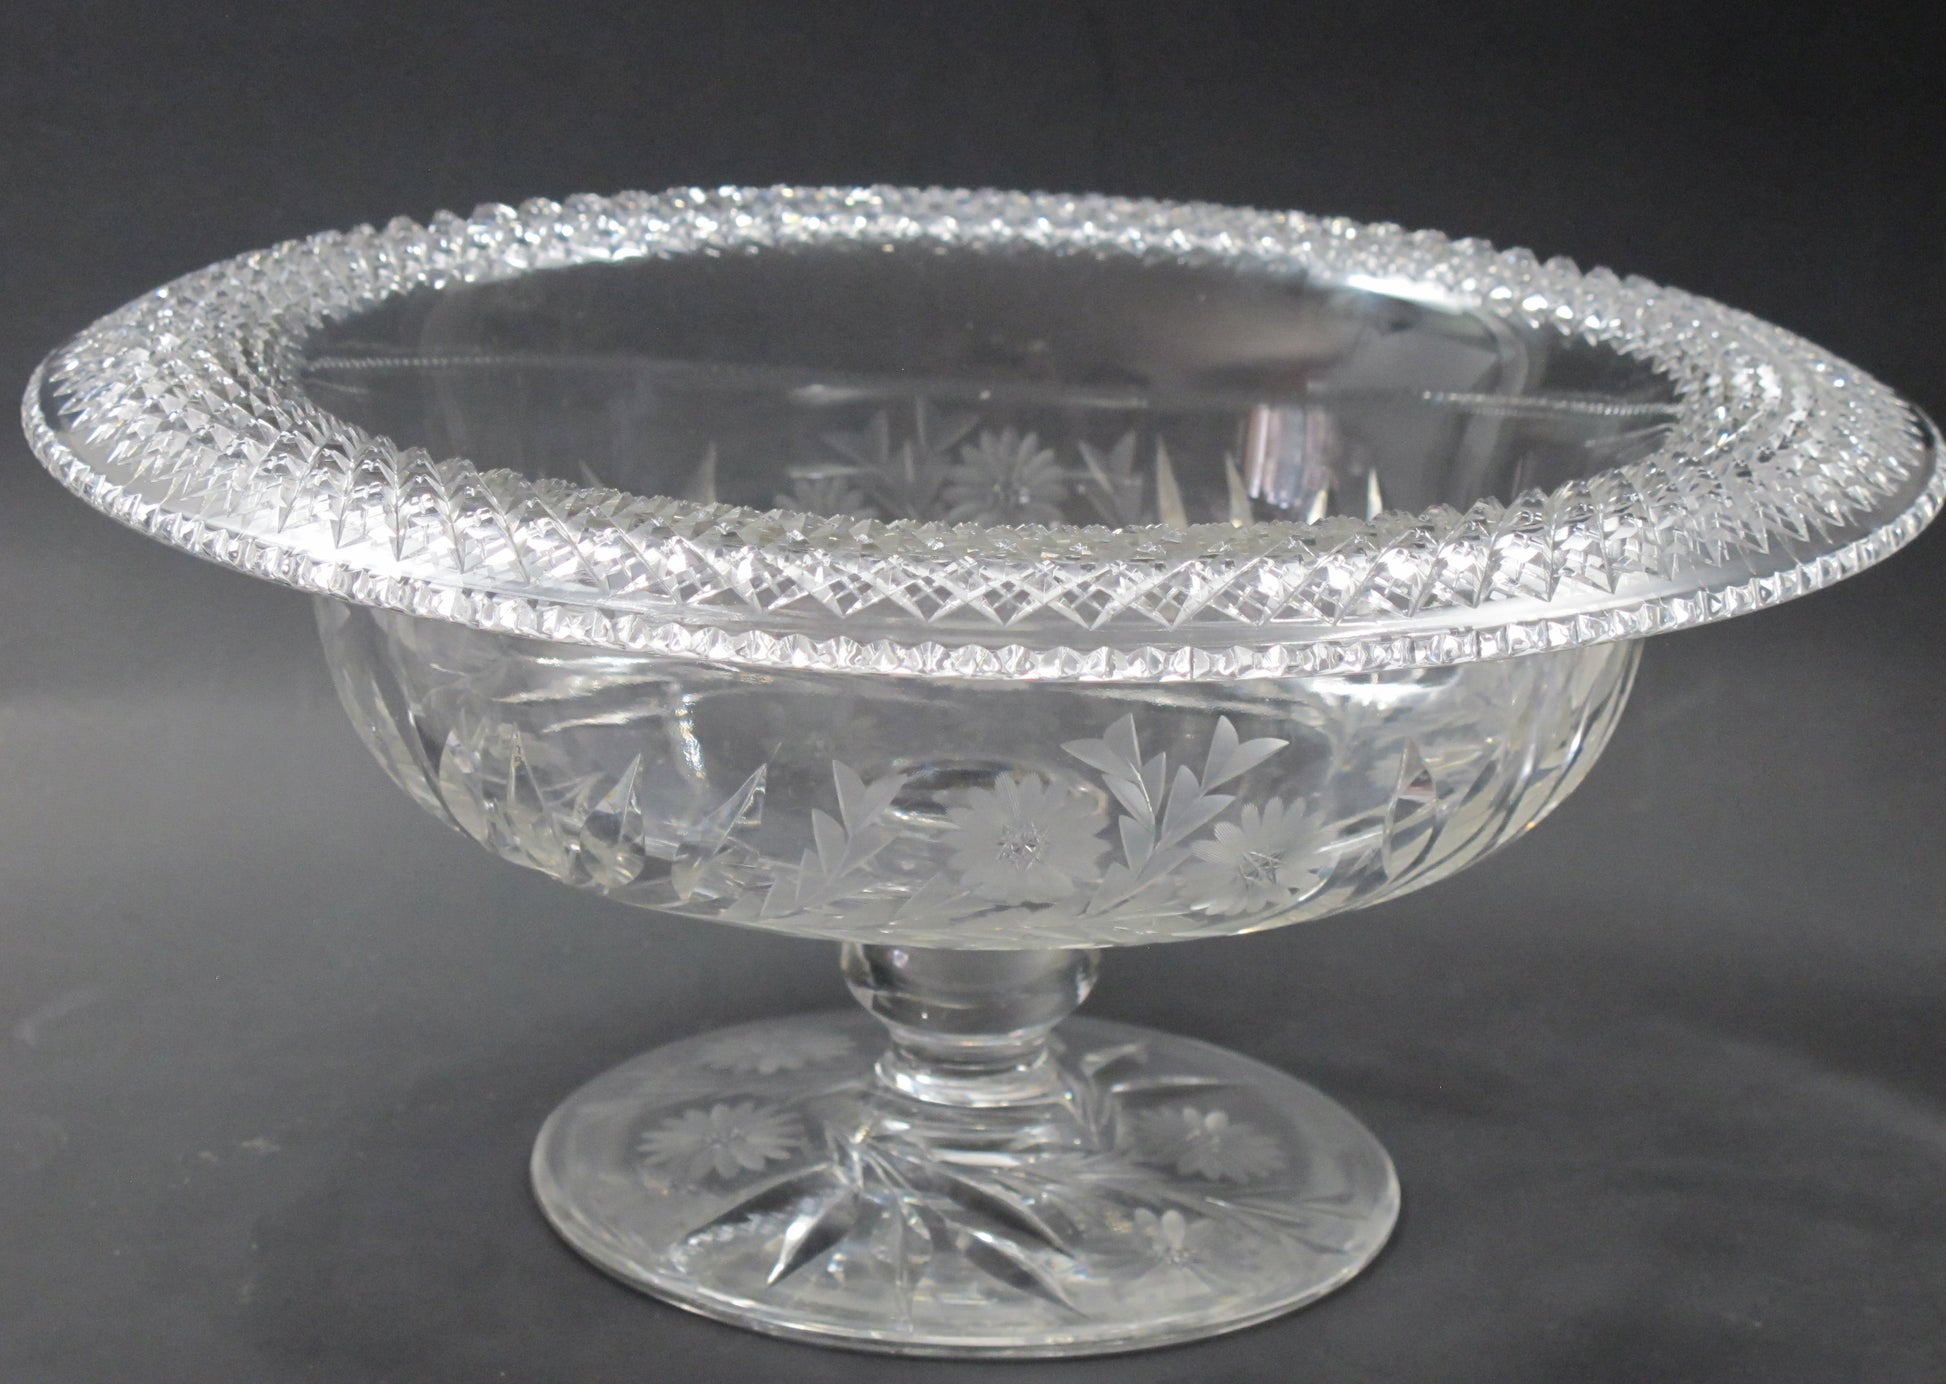 Hand cut Wheel glass rolled out 12" Pedestal bowl - O'Rourke crystal awards & gifts abp cut glass